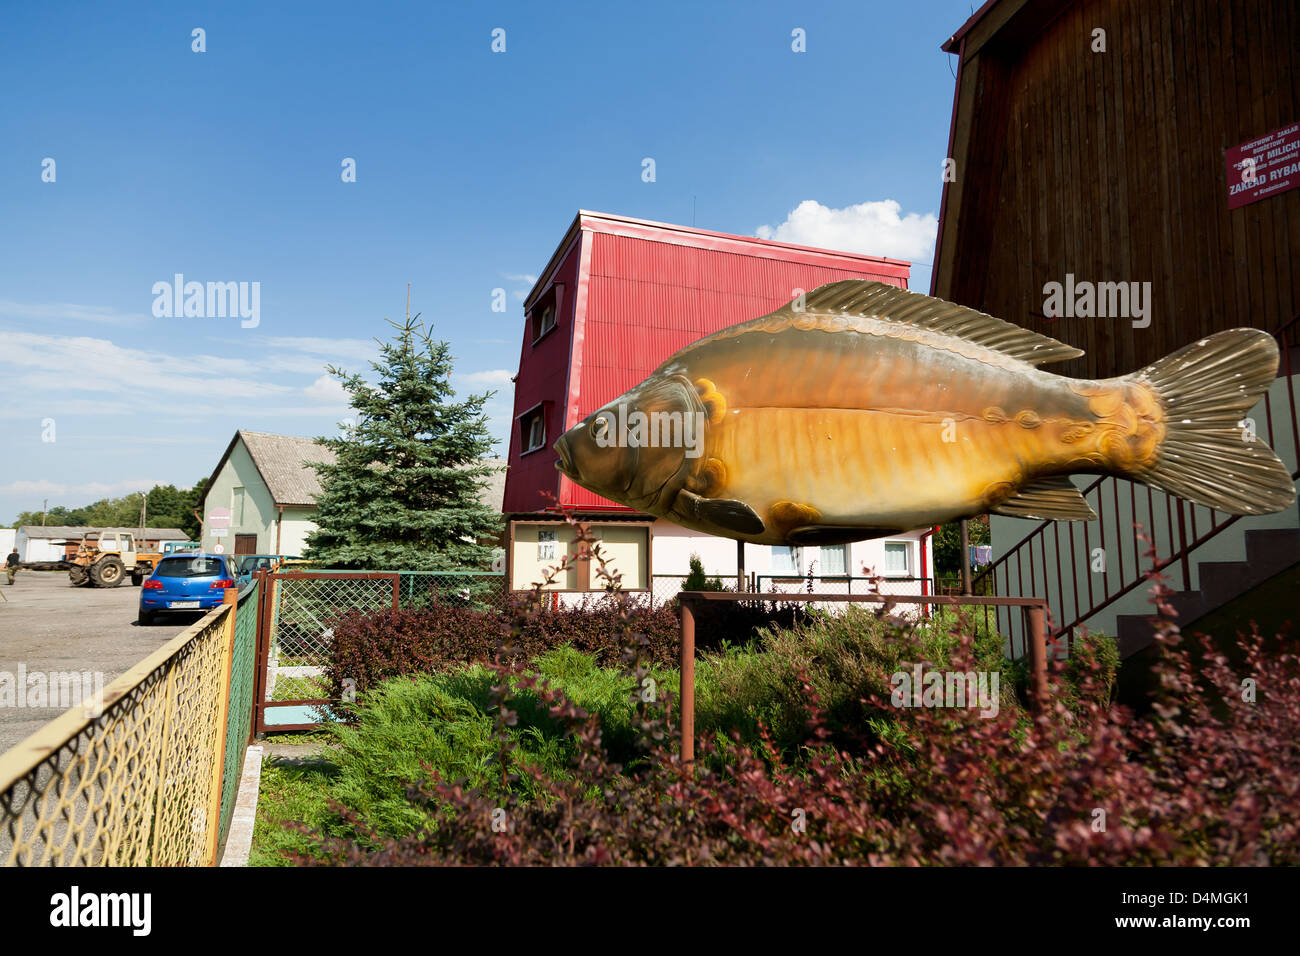 Kraschnitz, Poland, a large plastic fish indicates a state fish